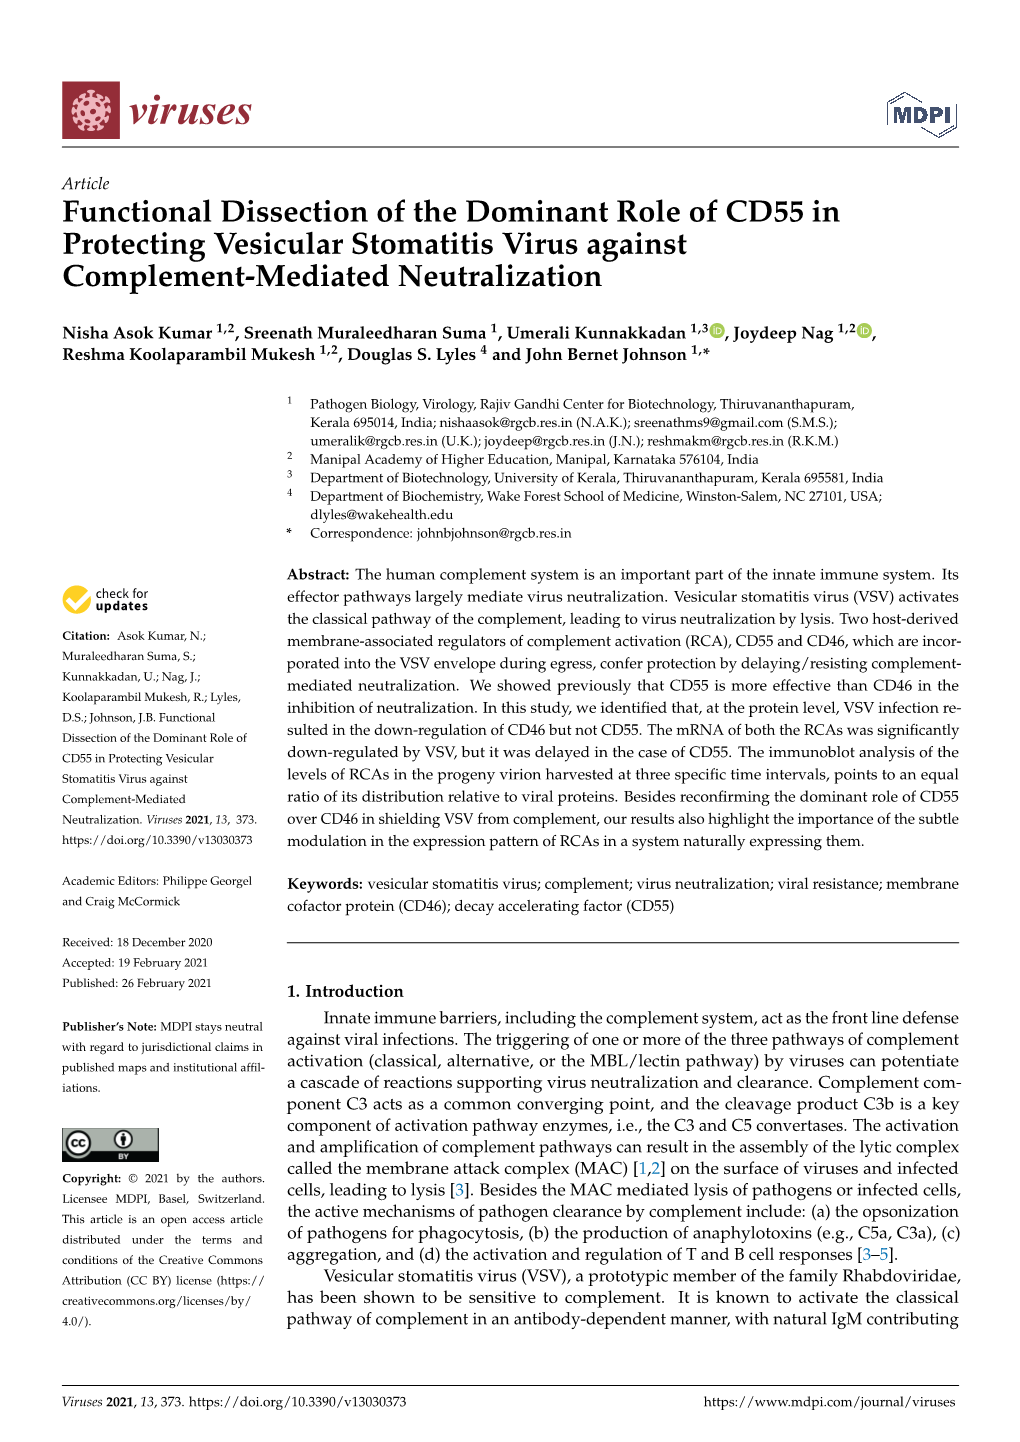 Functional Dissection of the Dominant Role of CD55 in Protecting Vesicular Stomatitis Virus Against Complement-Mediated Neutralization